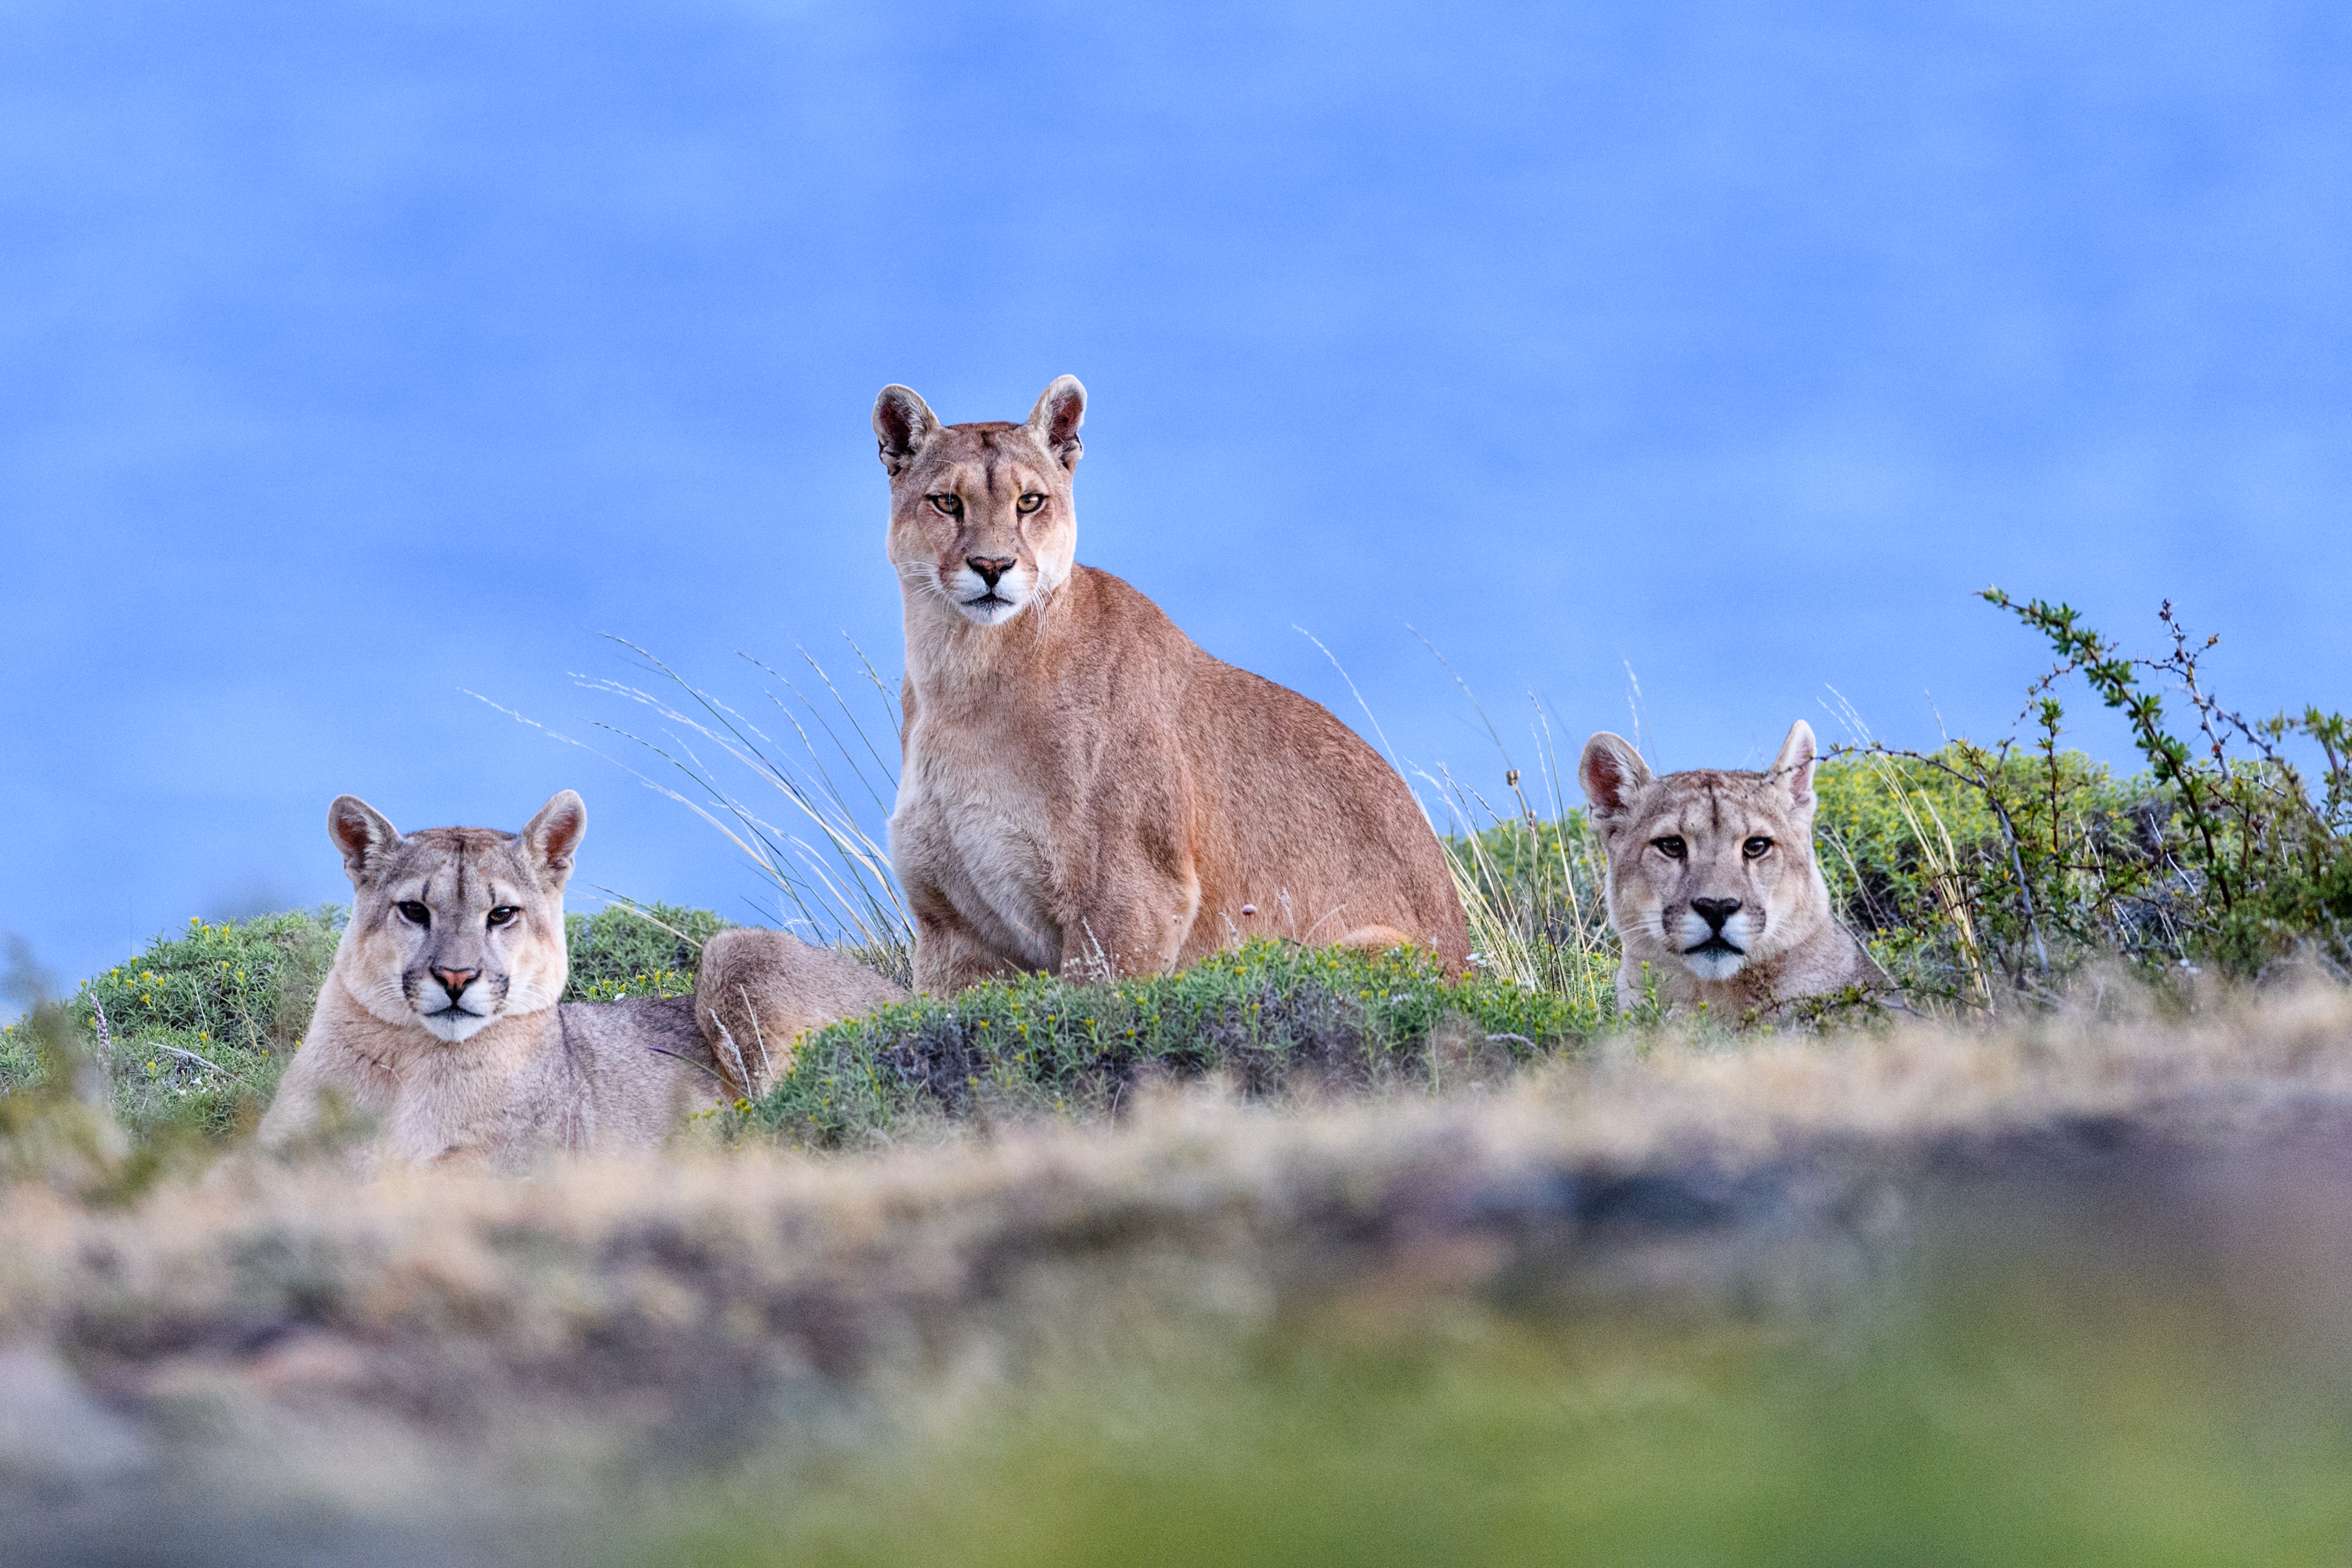 "Female puma with near-adult cubs with the blue of a glacial lake behind. Private ranch land on the outskirts of Torres del Paine National Park, Patagonia, Chile."